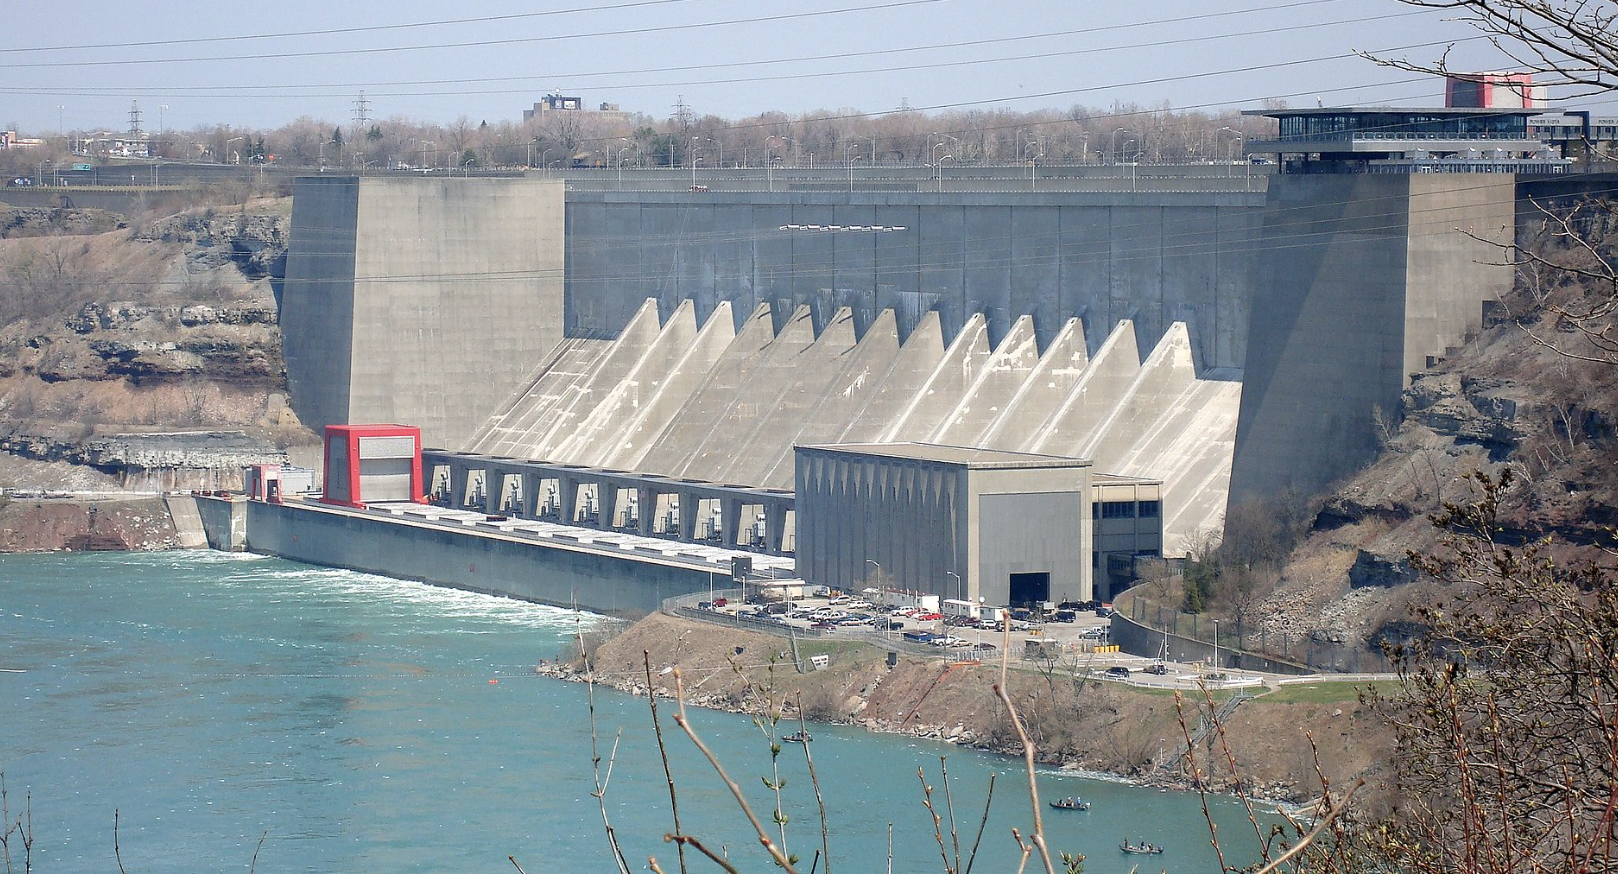 A view of the The Robert Moses Niagara Hydroelectric Power Station in Lewiston, New York.